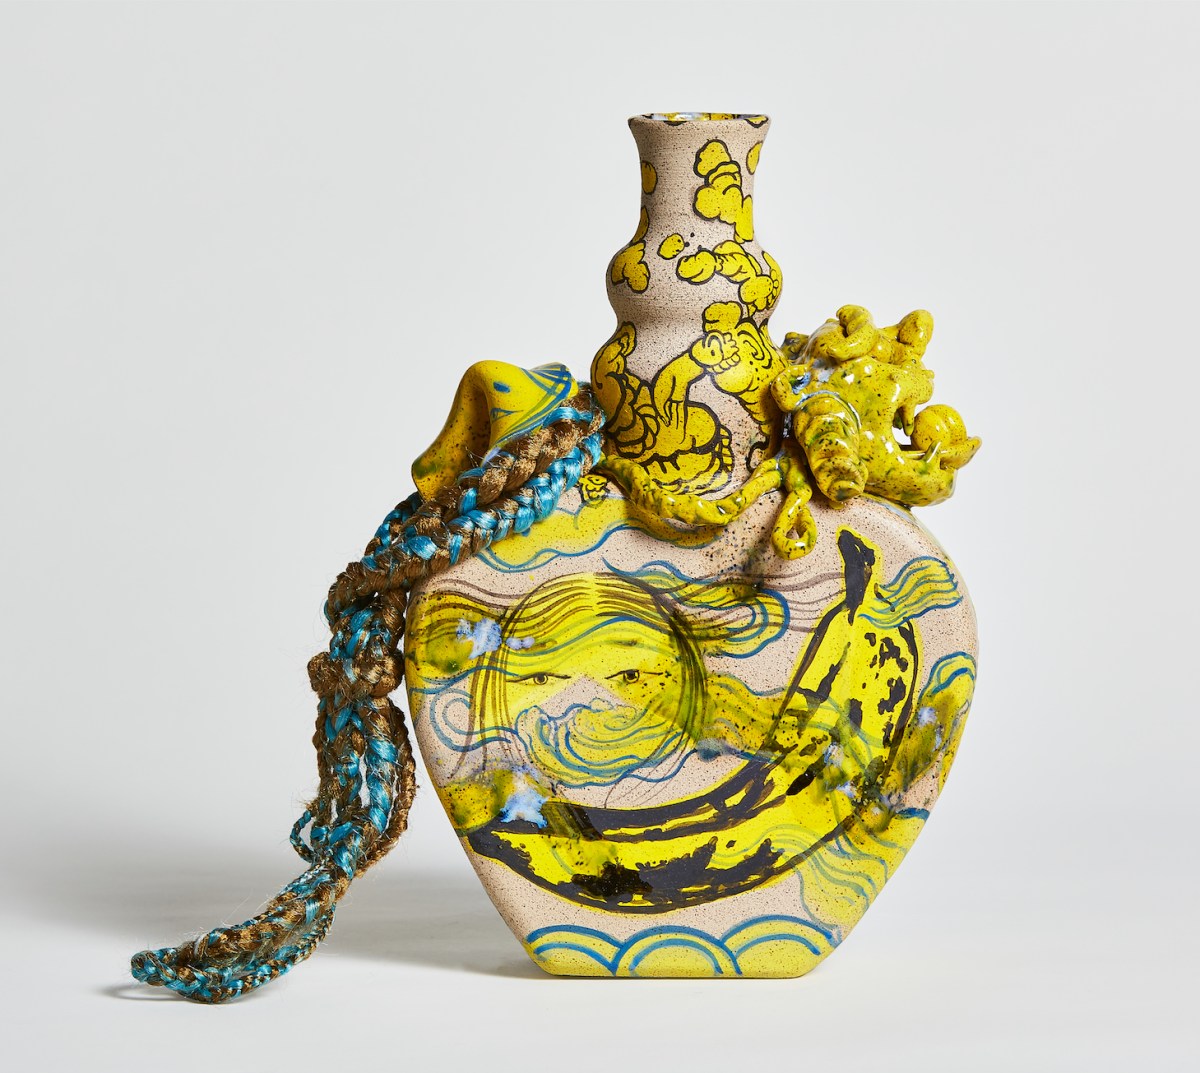 A colorful ceramic vase features abstract painted illustrations of a Asian woman's face, a ripe banana, and other lines and forms in yellow and blue. The narrow neck of the vase has braided synthetic hair, also in blue and yellow, draped and knotted around it.